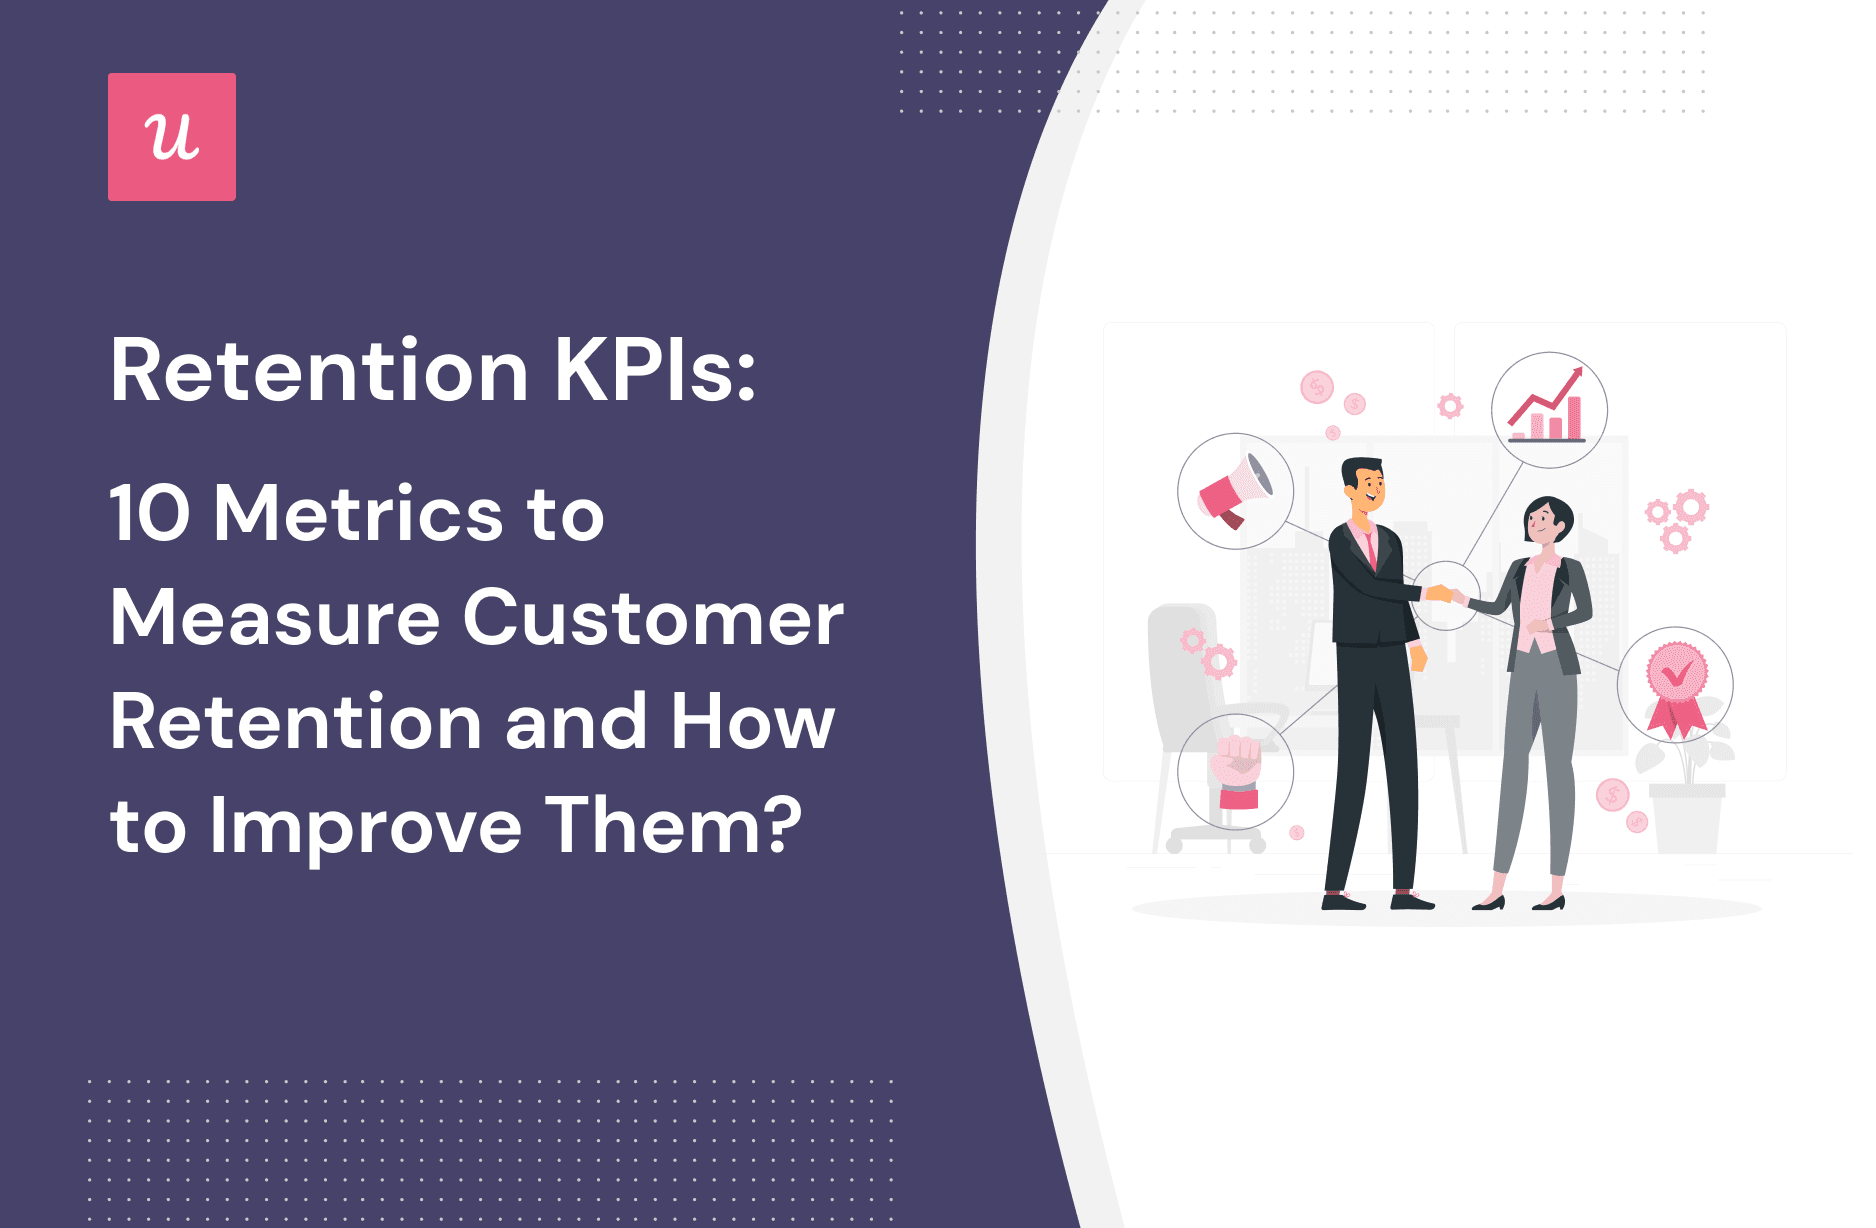 Retention KPIs: 10 Metrics To Measure Customer Retention and How To Improve Them? cover